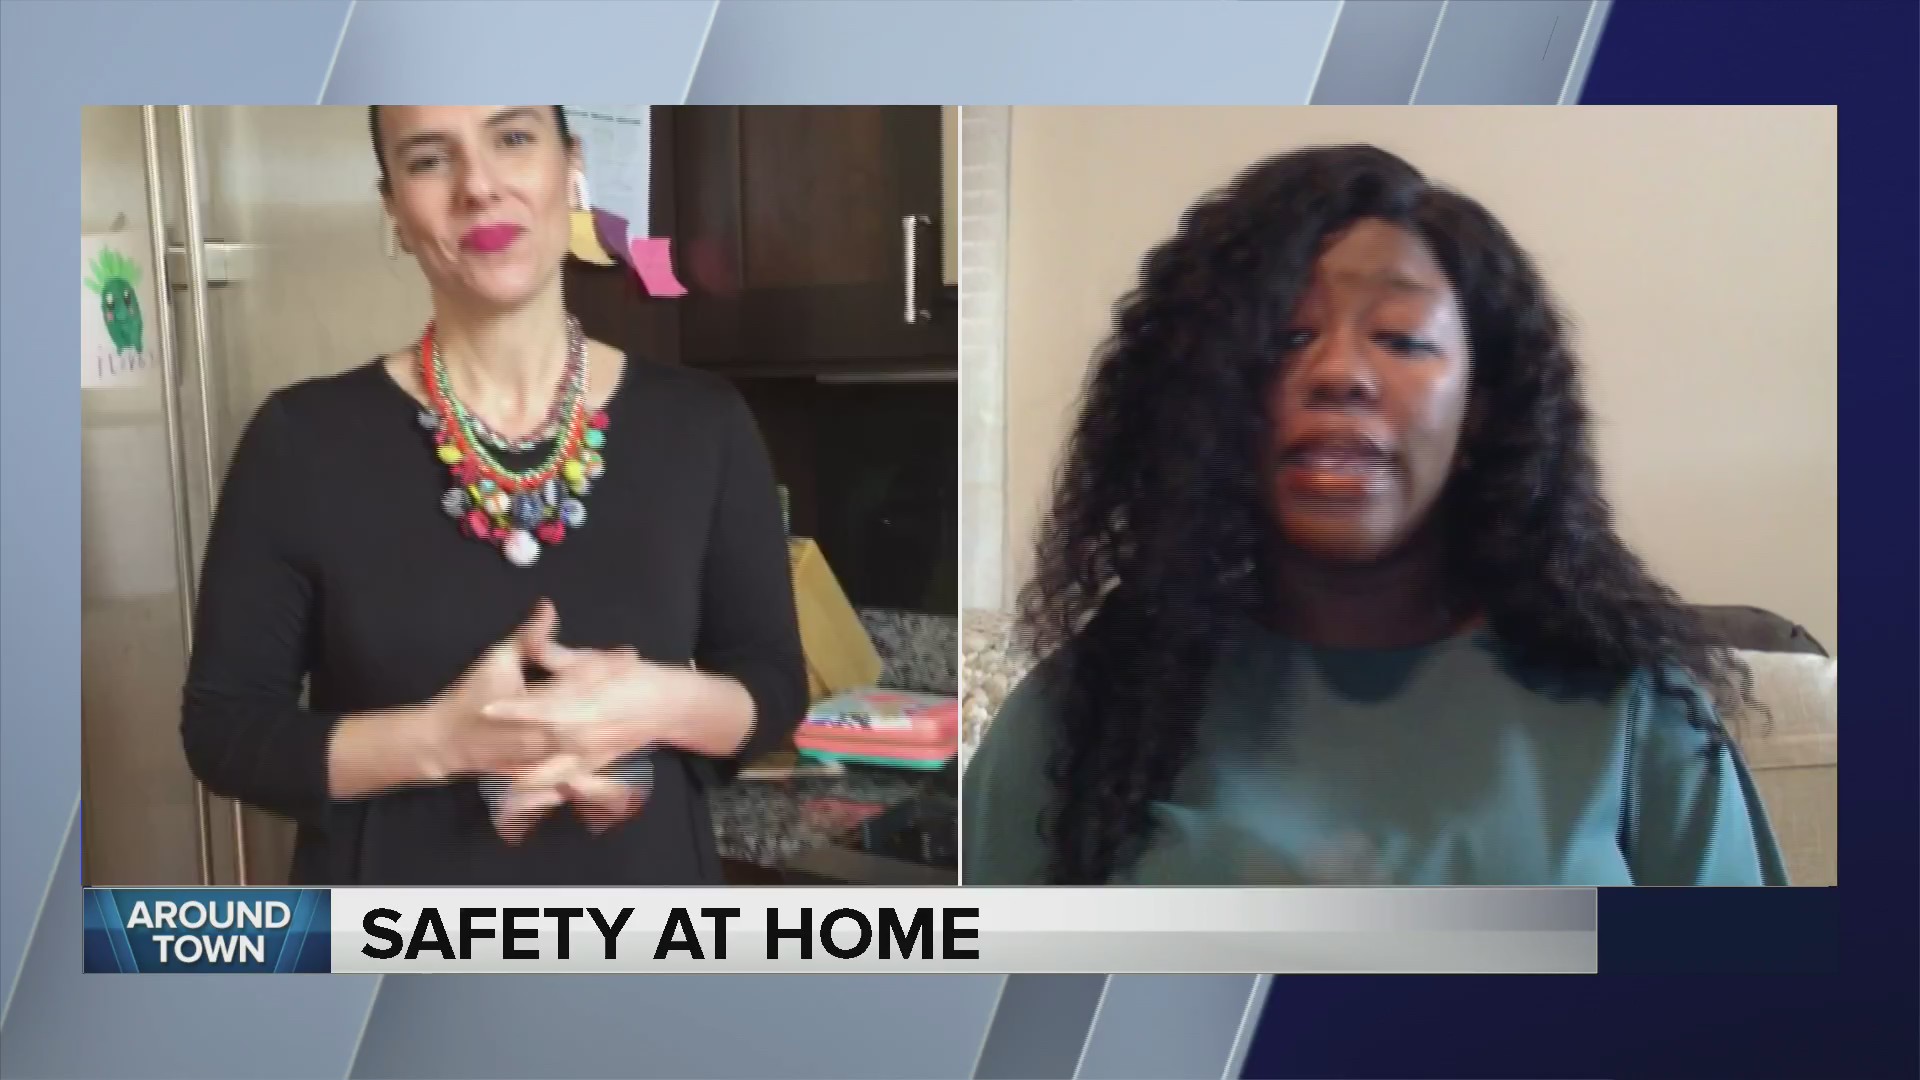 Around ‘The House’ learns some tips about safety at home